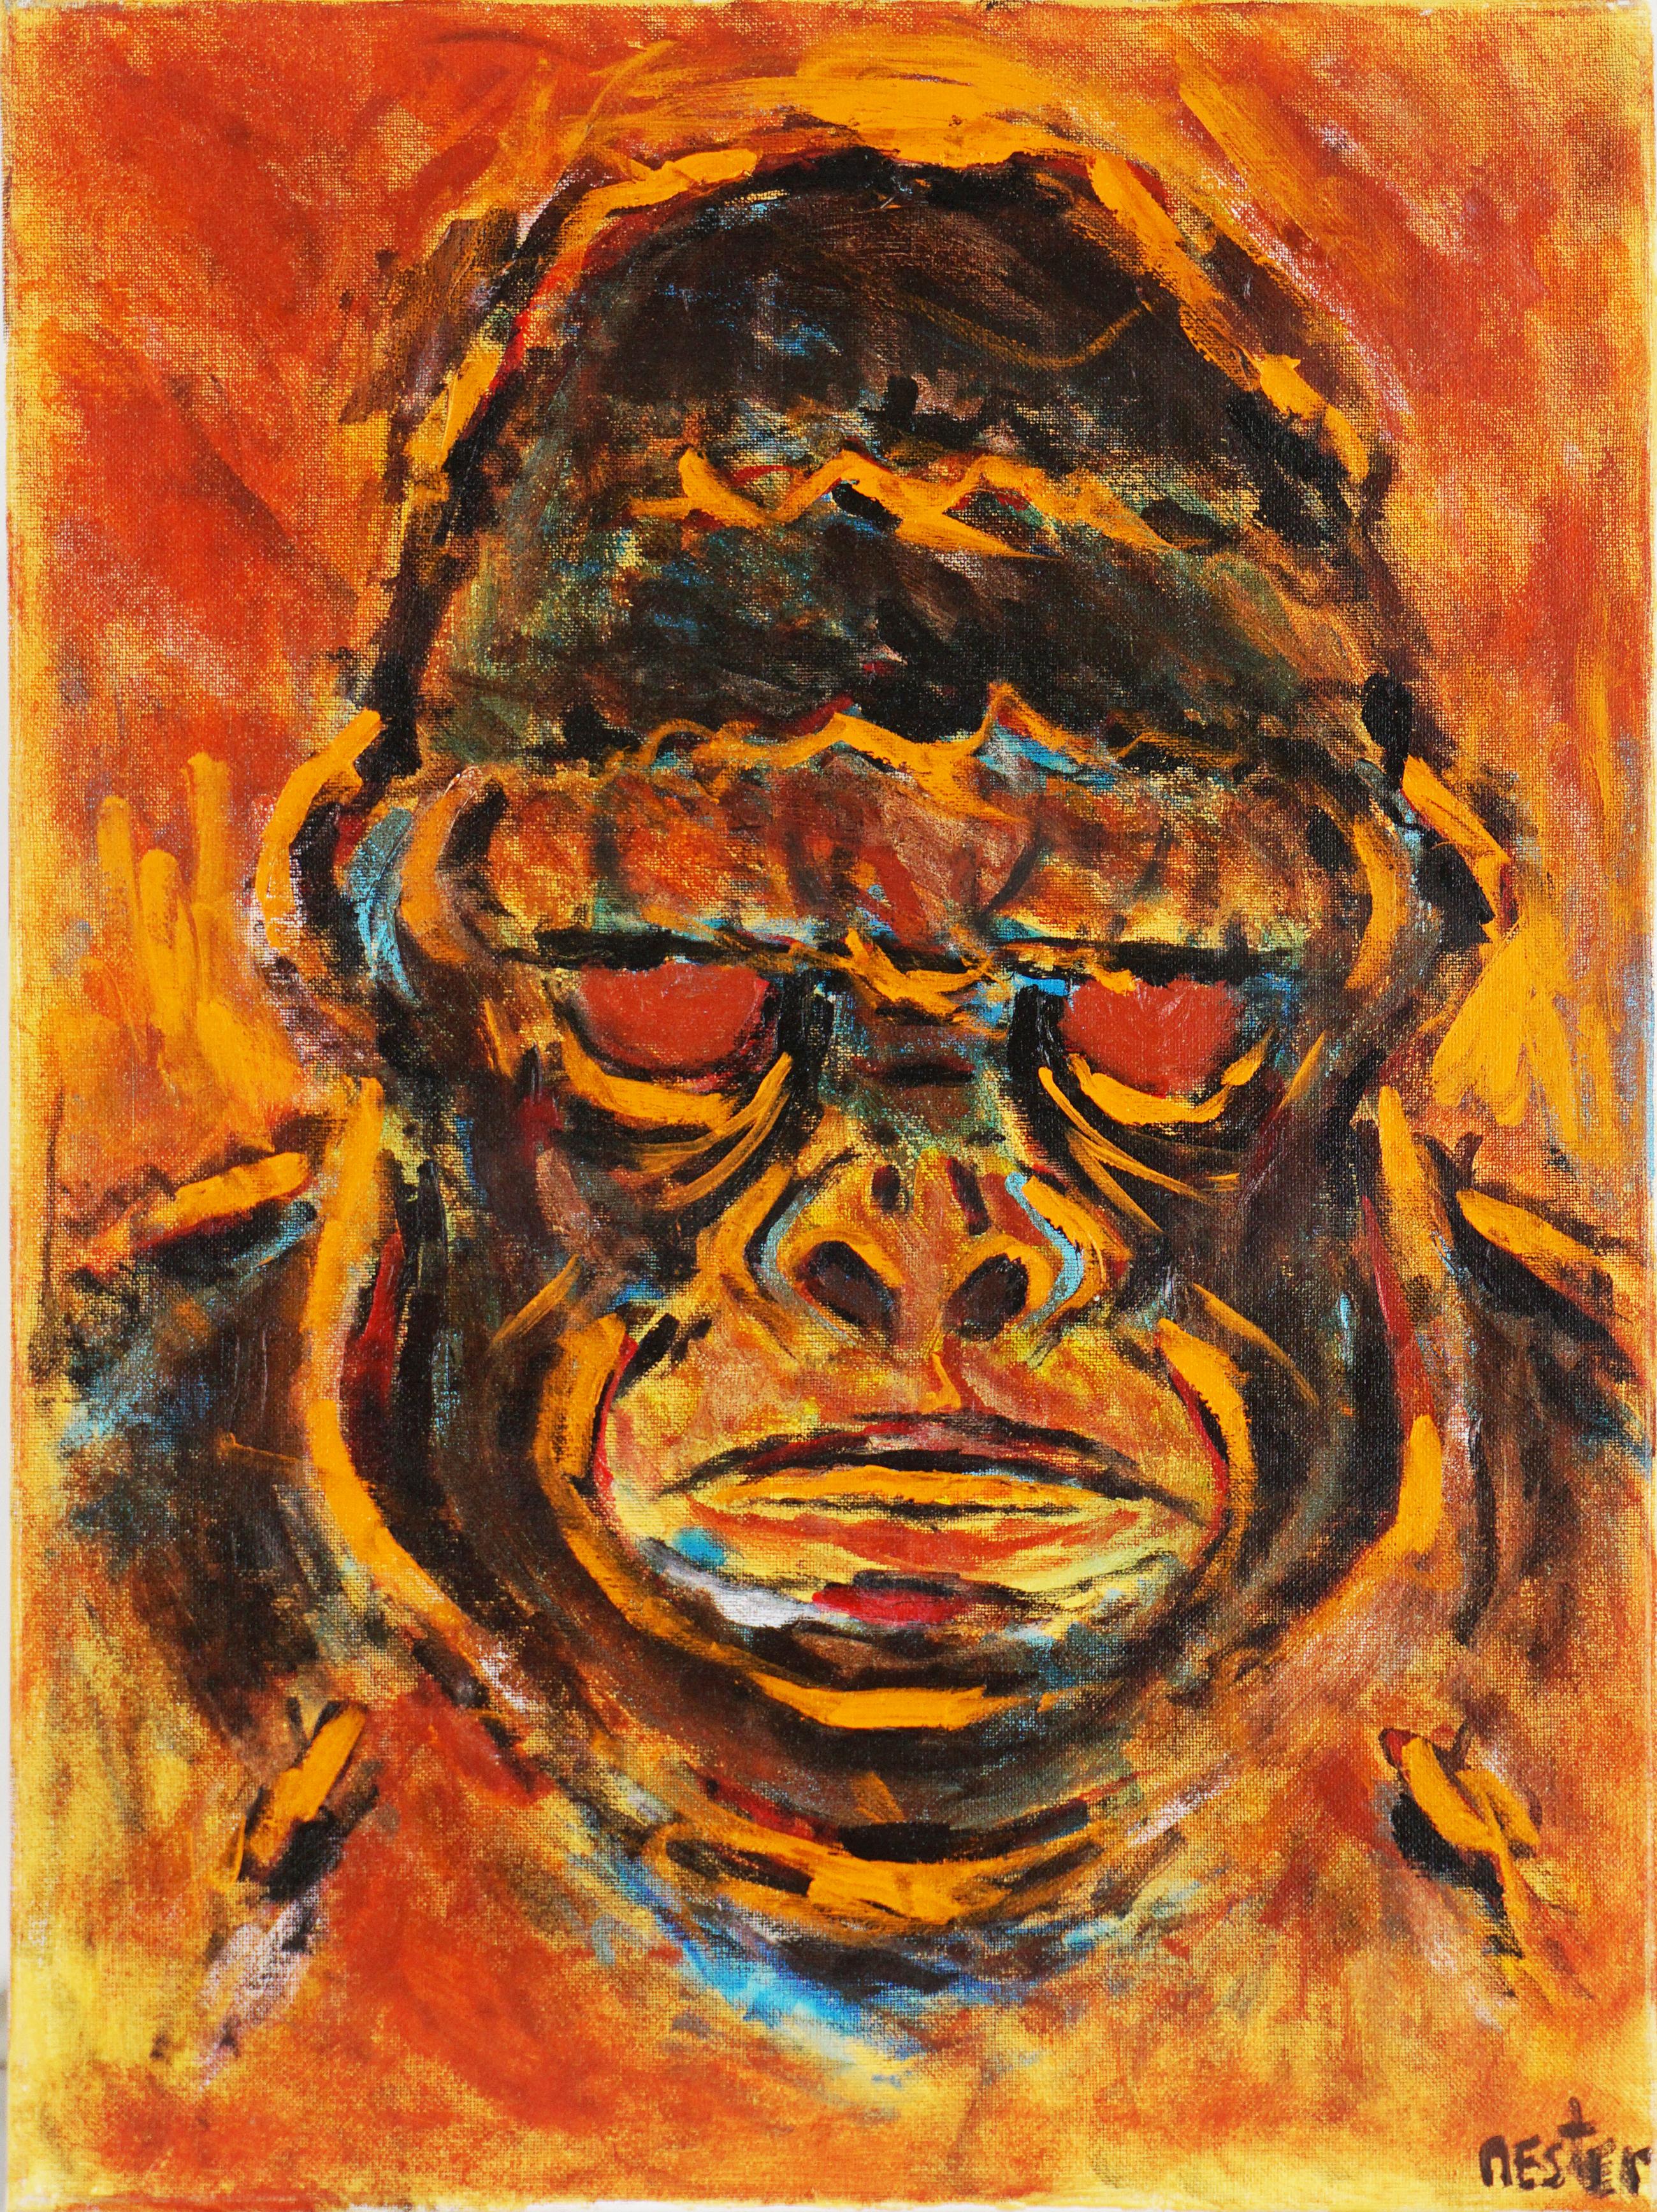 Daniel Nester Animal Painting - Fauvist Abstract Expressionist Lowland Gorilla